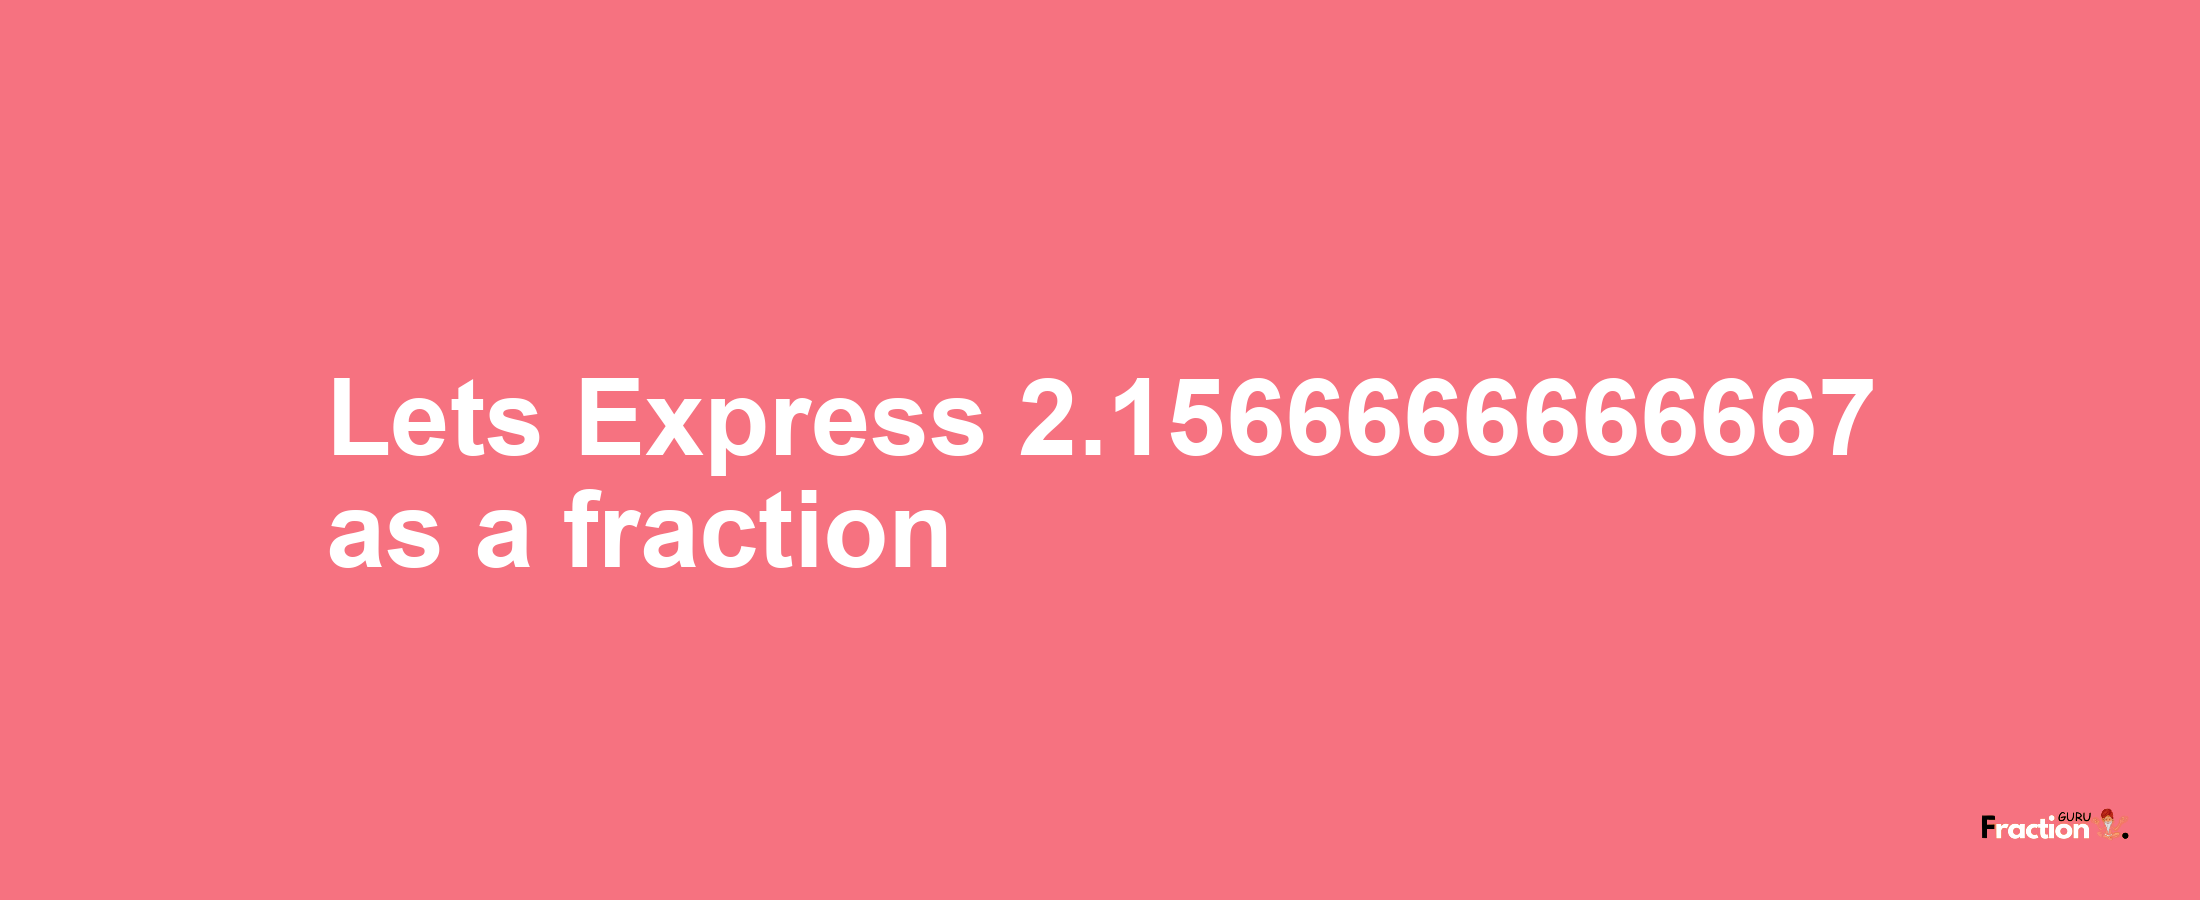 Lets Express 2.1566666666667 as afraction